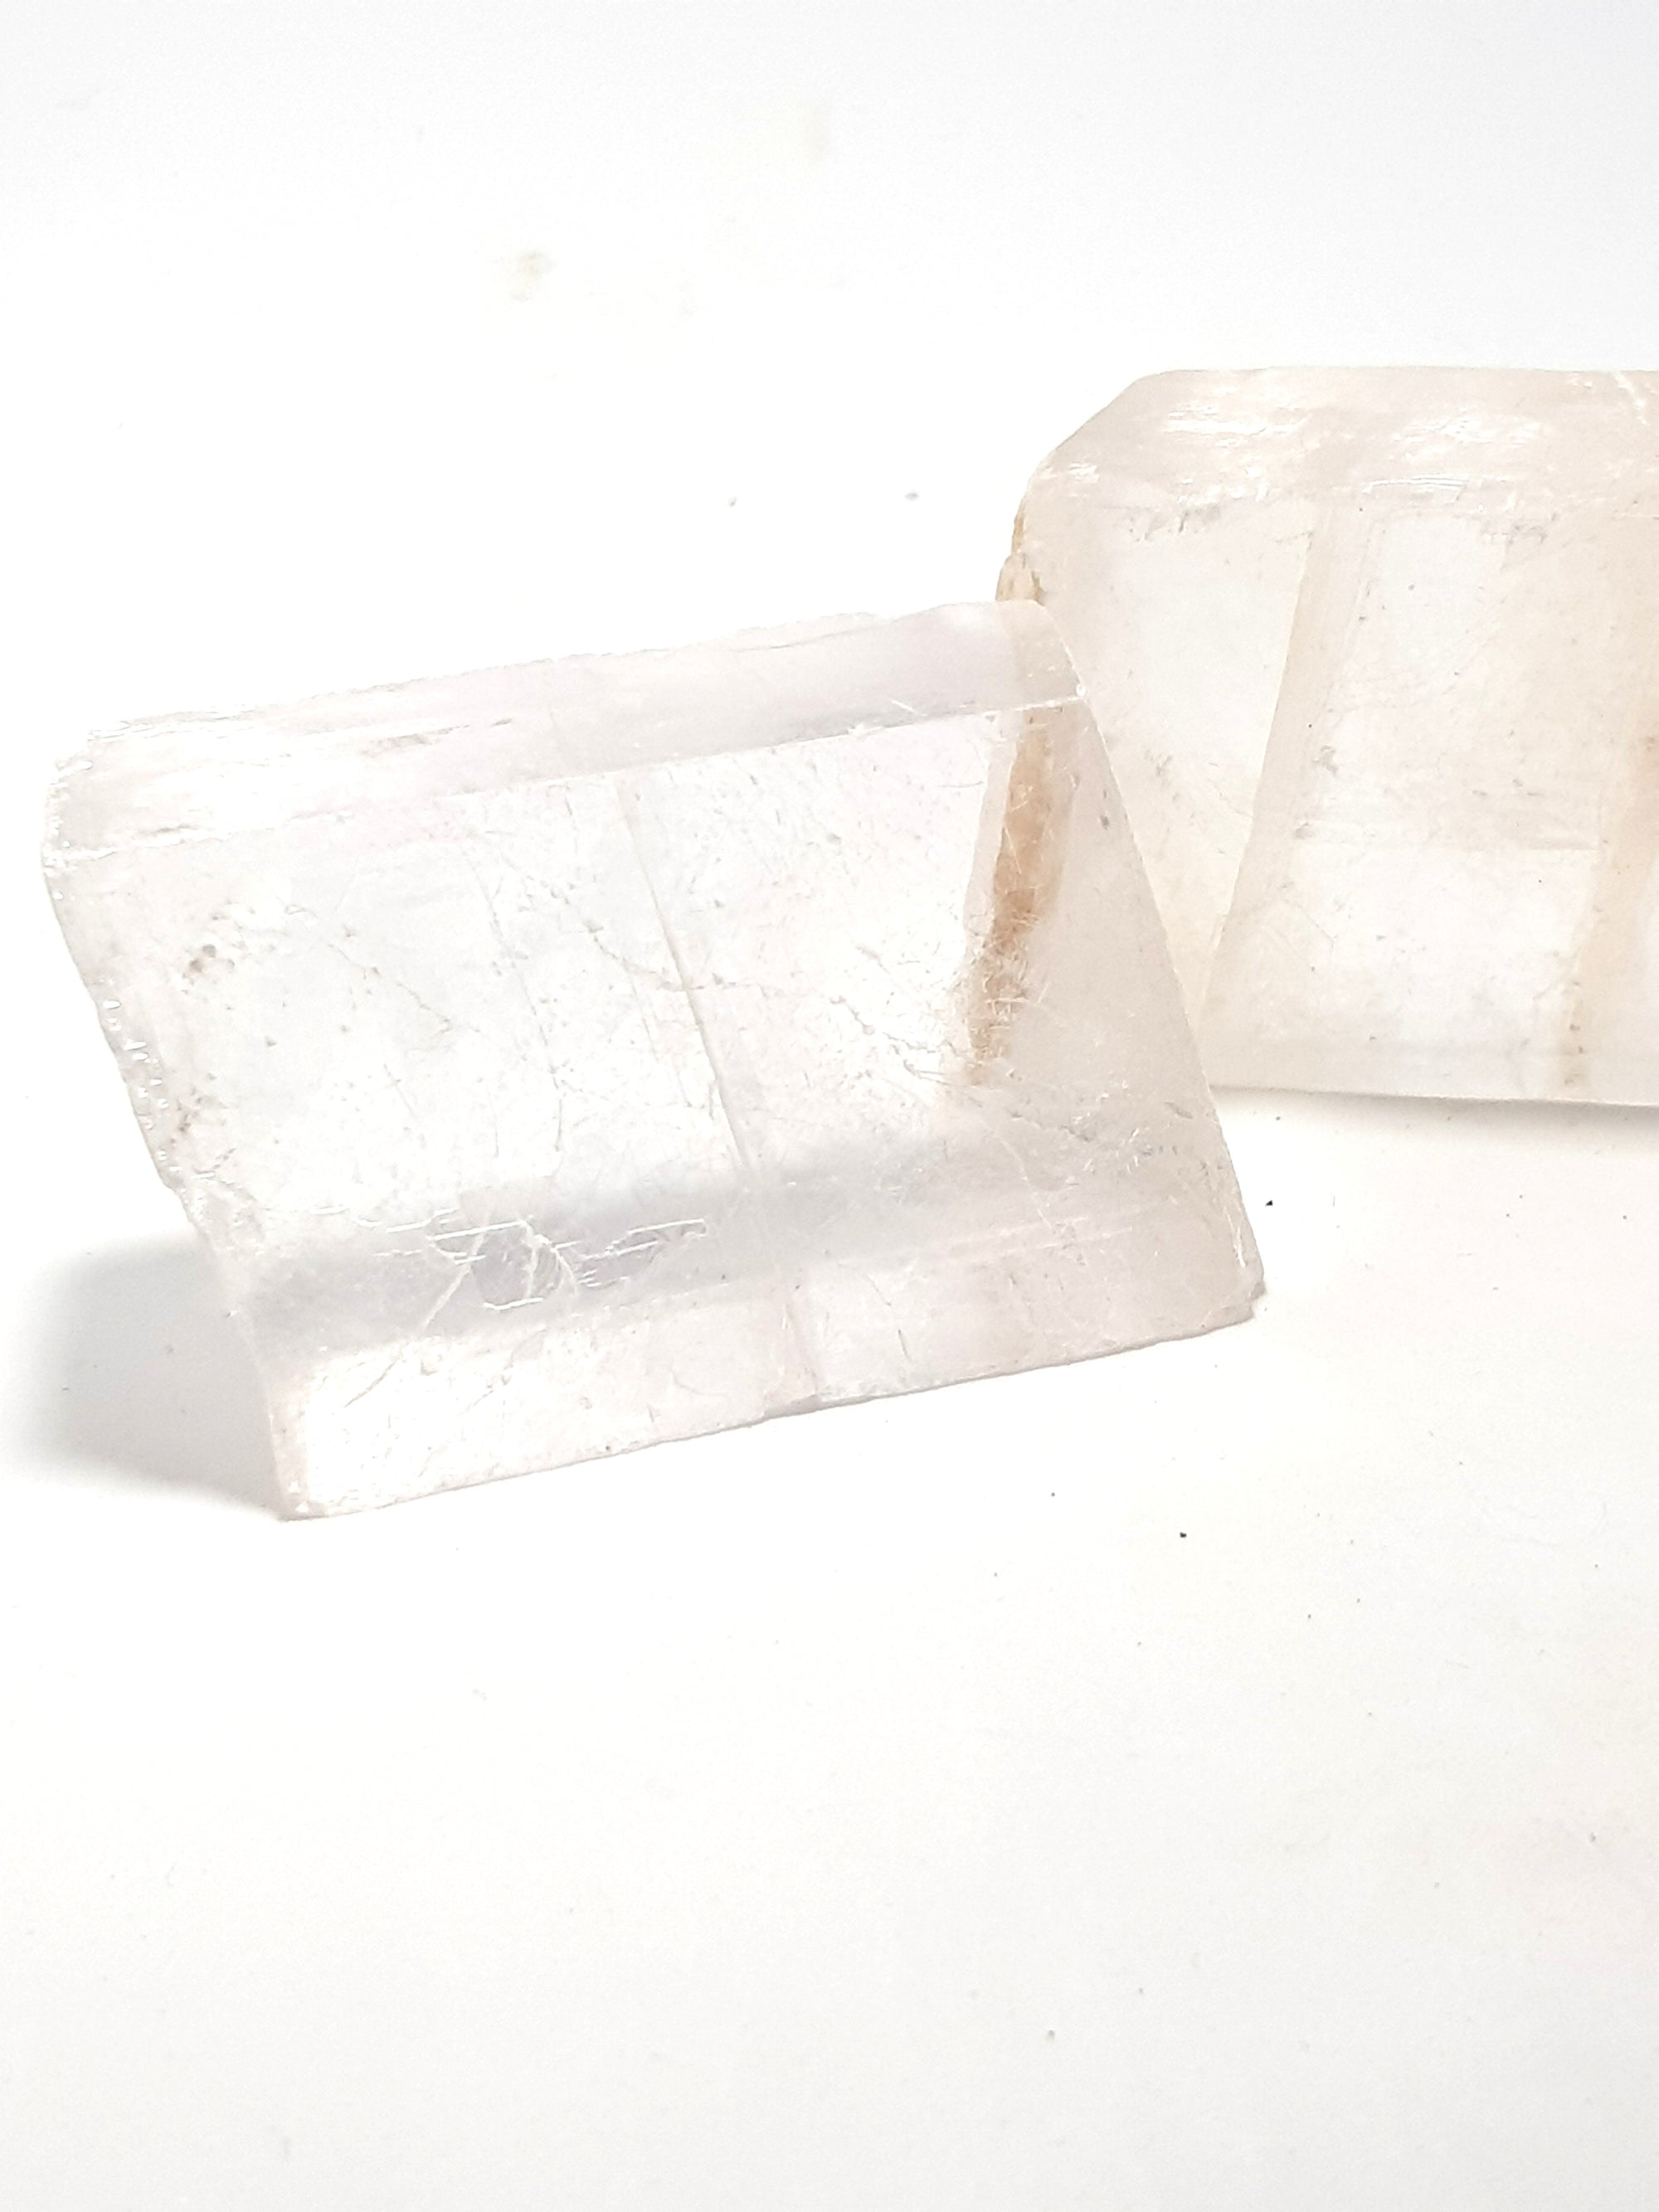 two calcite rhombohedrons. They are clear and very translucent